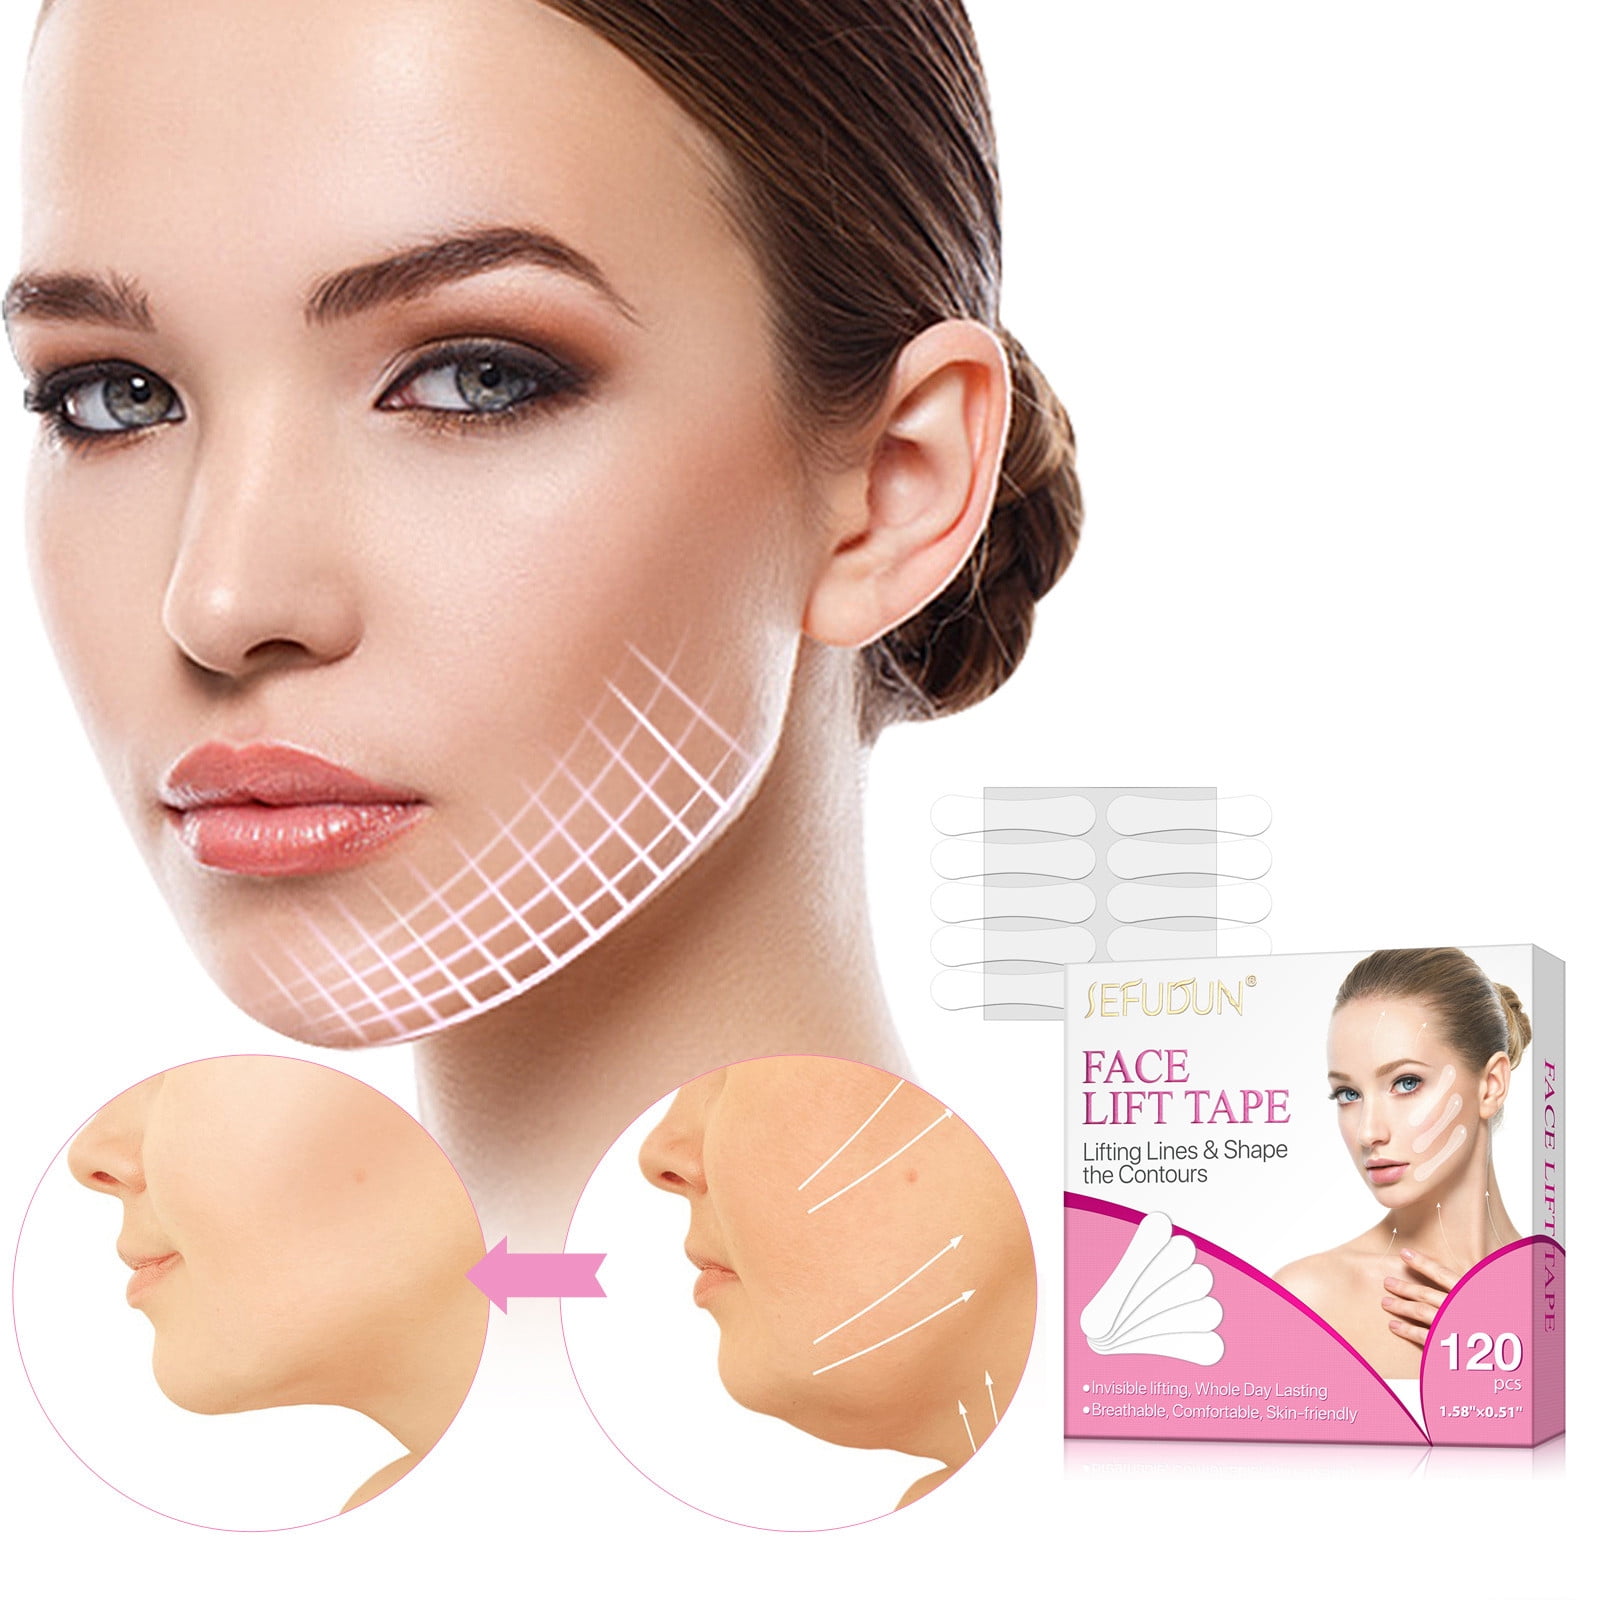  WXYINSPAS 40 Pcs Face Tape Lifting Invisible with String for  Wrinkles, Jowls, Neck, Eye, Waterproof High Elasticity V Shape Lift Tape  Stickers, Instant Makeup Bands : Beauty & Personal Care